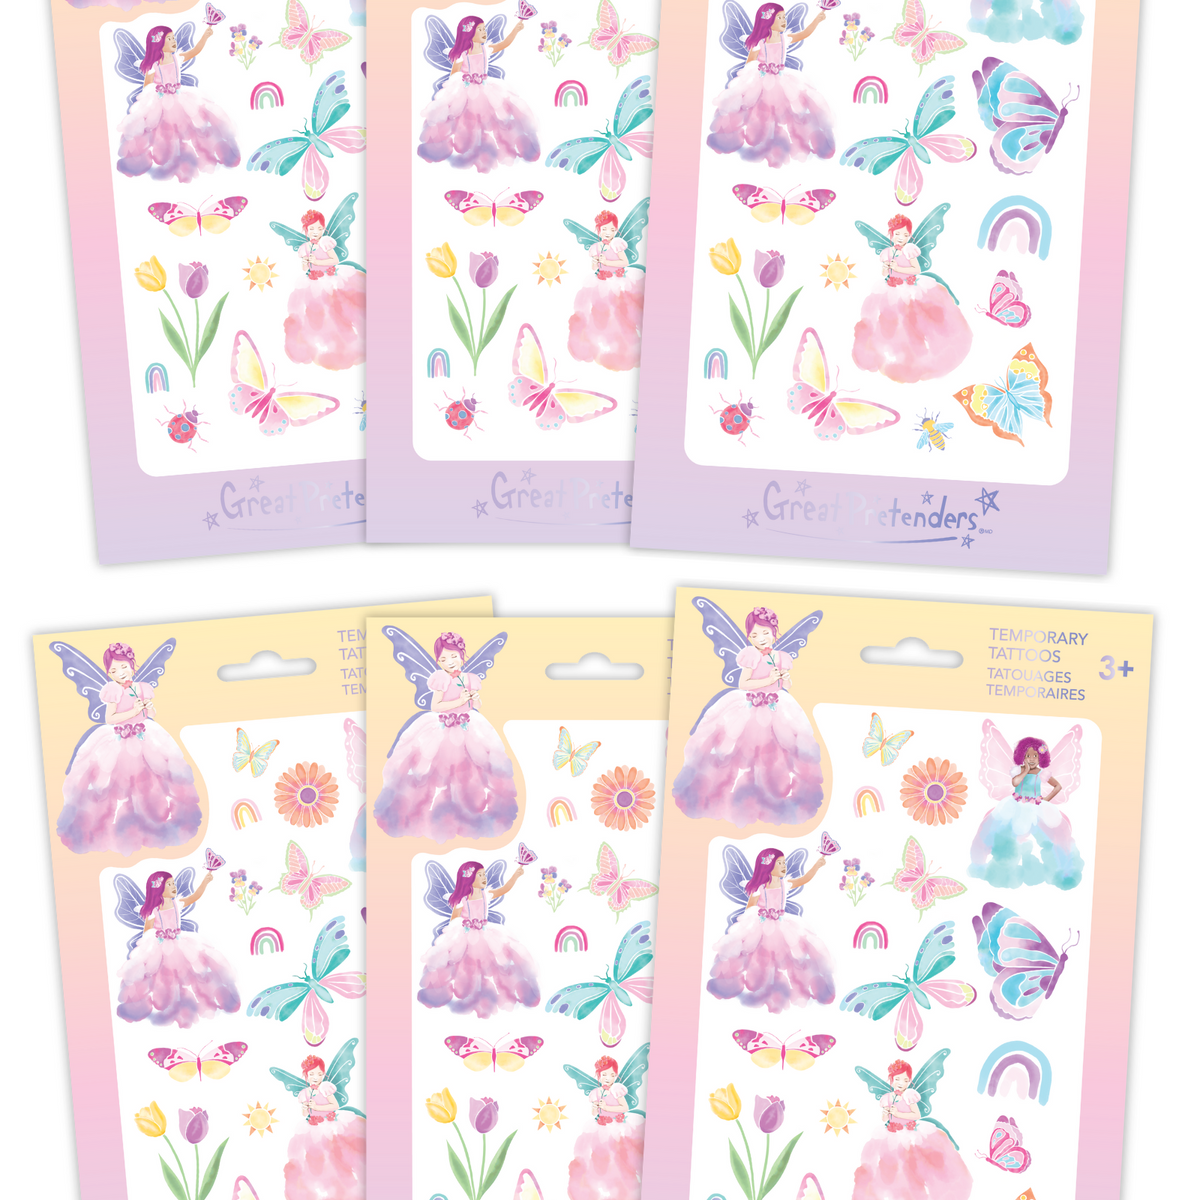 6 Packs of Fairy Face Stickers